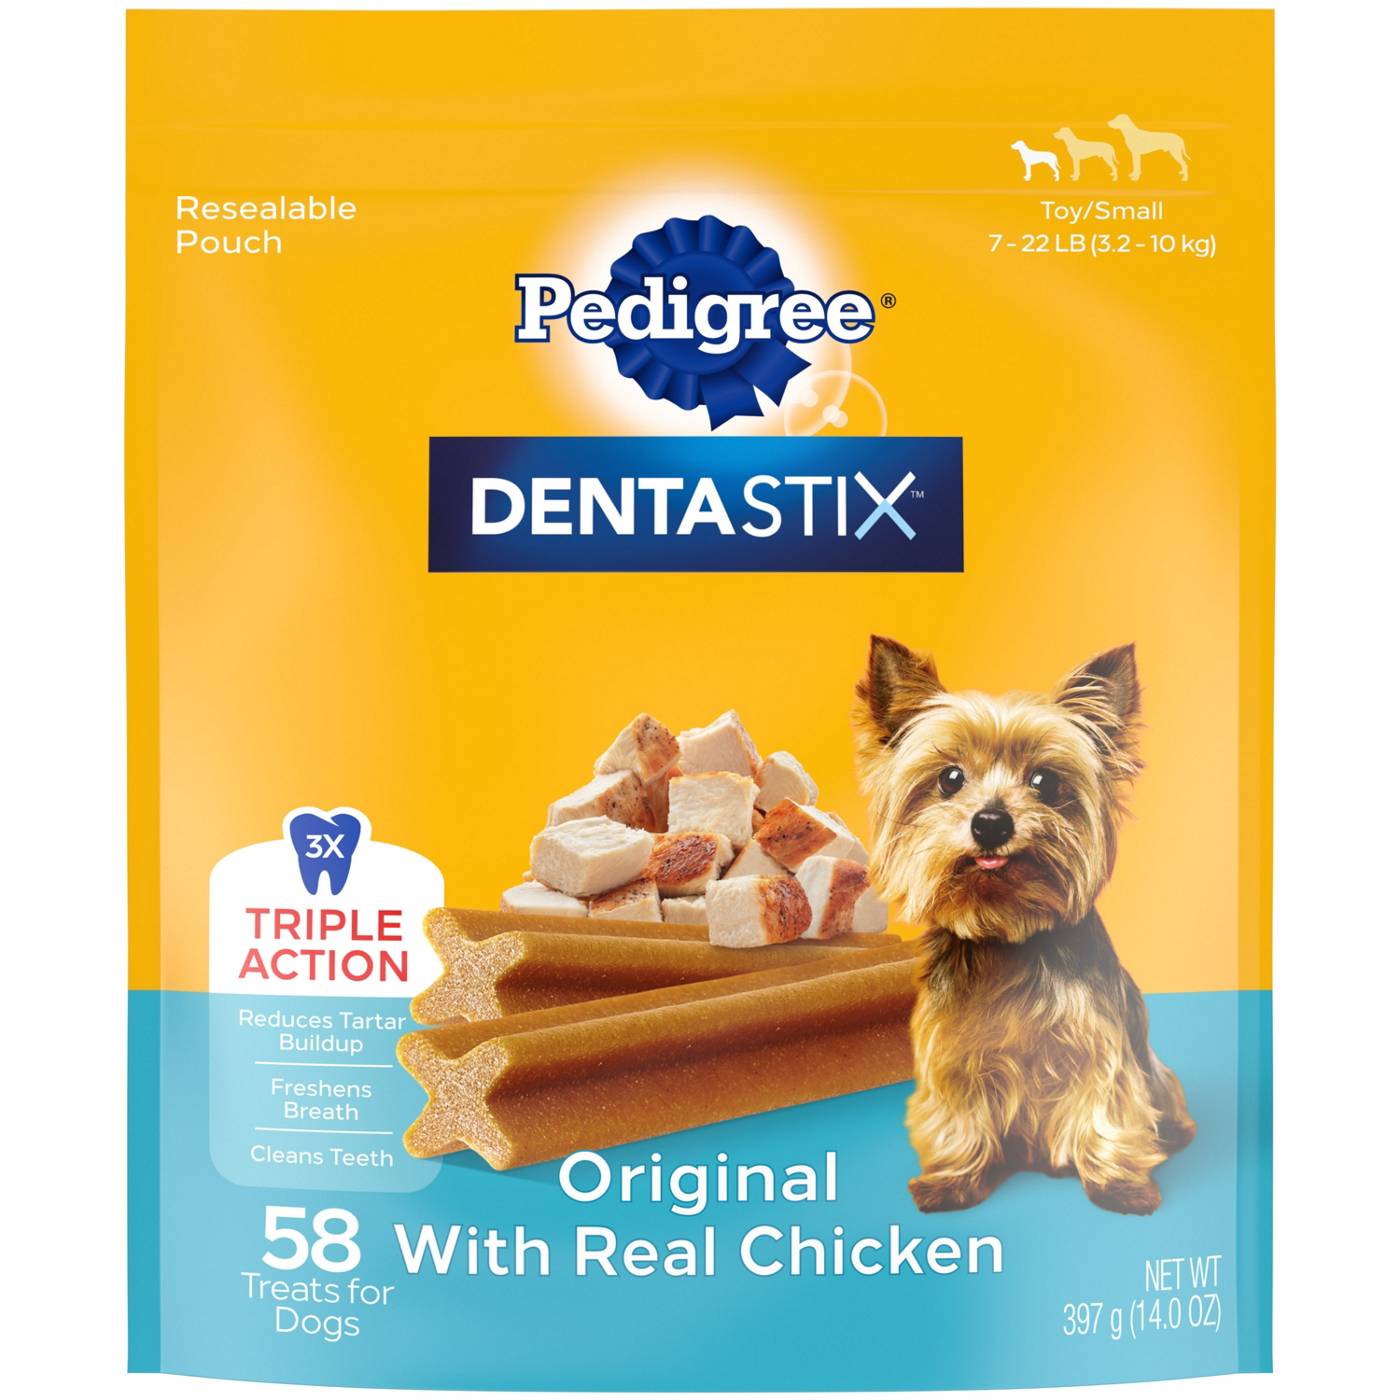 Pedigree DENTASTIX Daily Oral Care Toy & Small Dog Treats Value Size; image 1 of 5